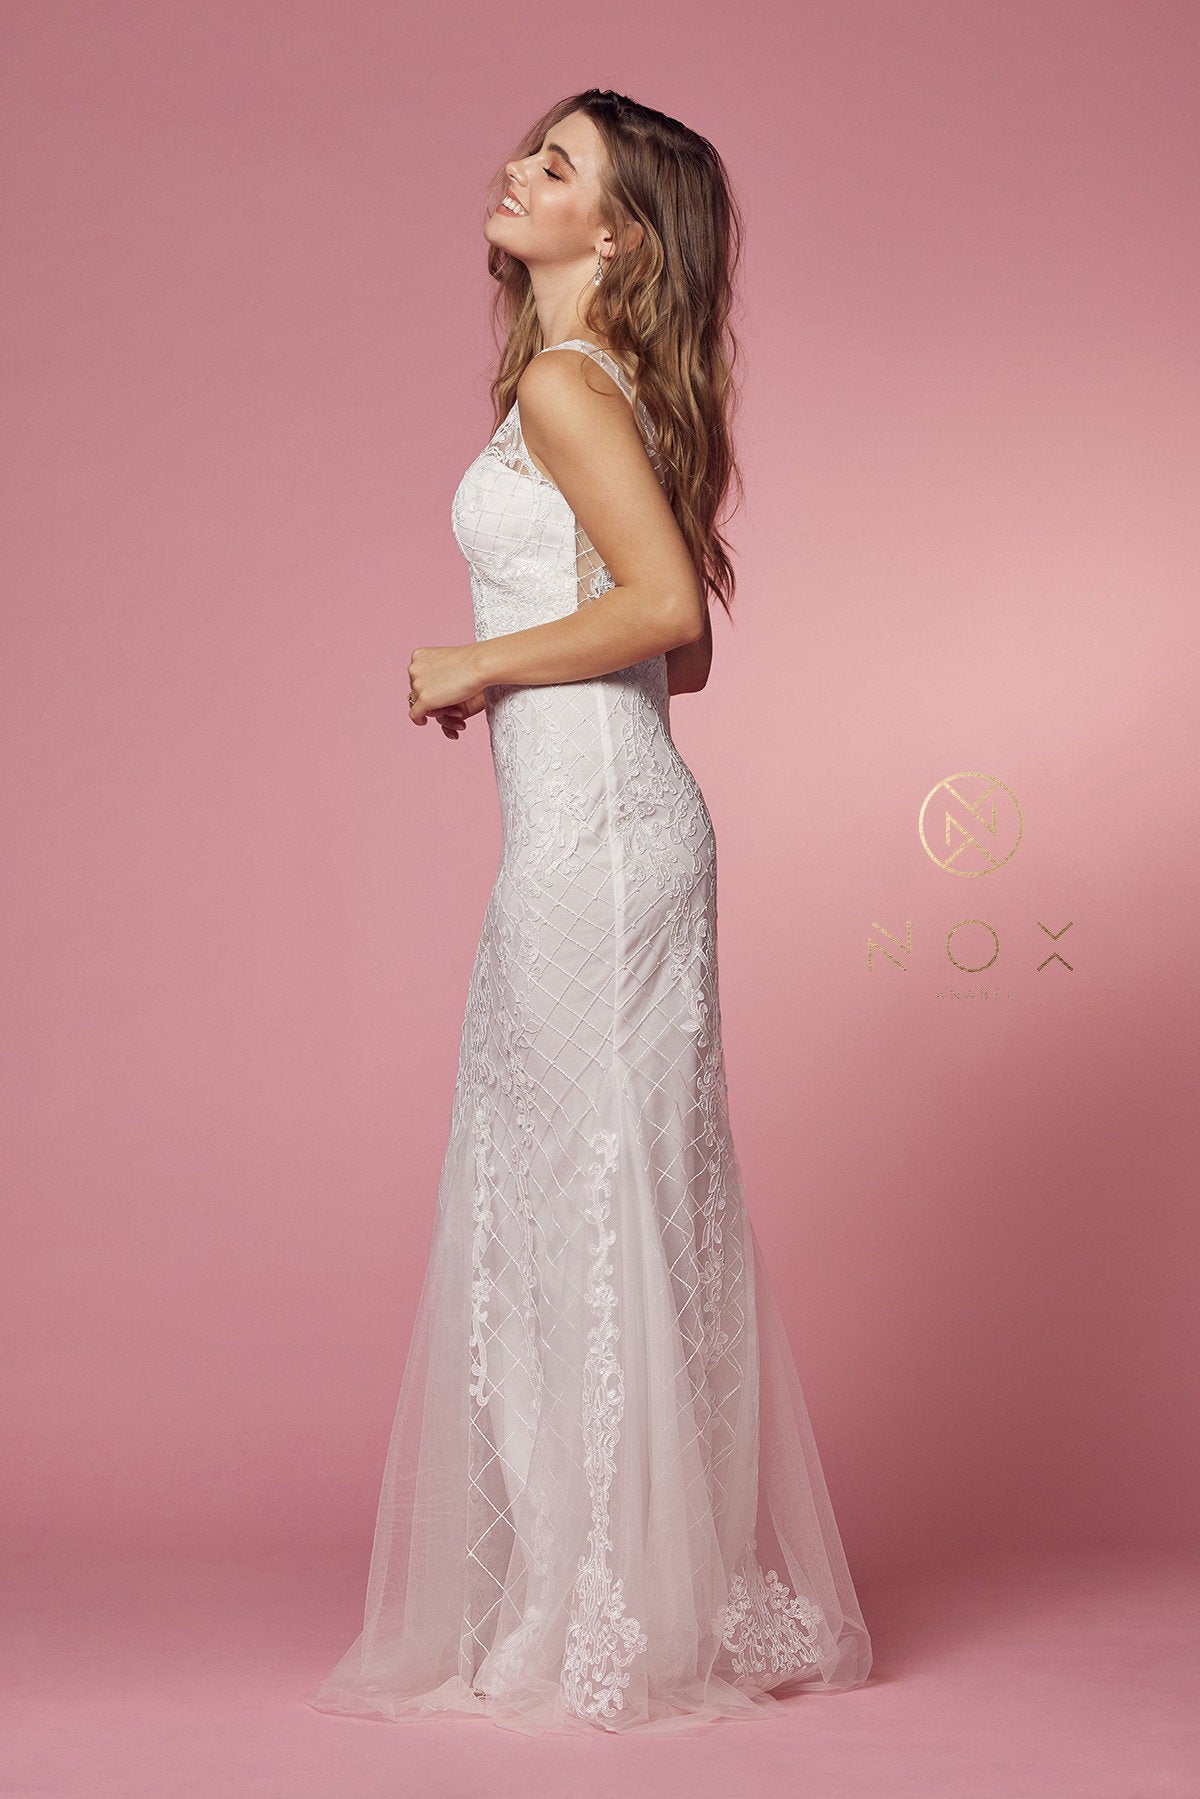 Embroidered-Bodice Long Mermaid Wedding Dress Sleeveless Bridal Size 16 Gown Sweep Train Open V Back Deep V Neckline Embroidery Lace